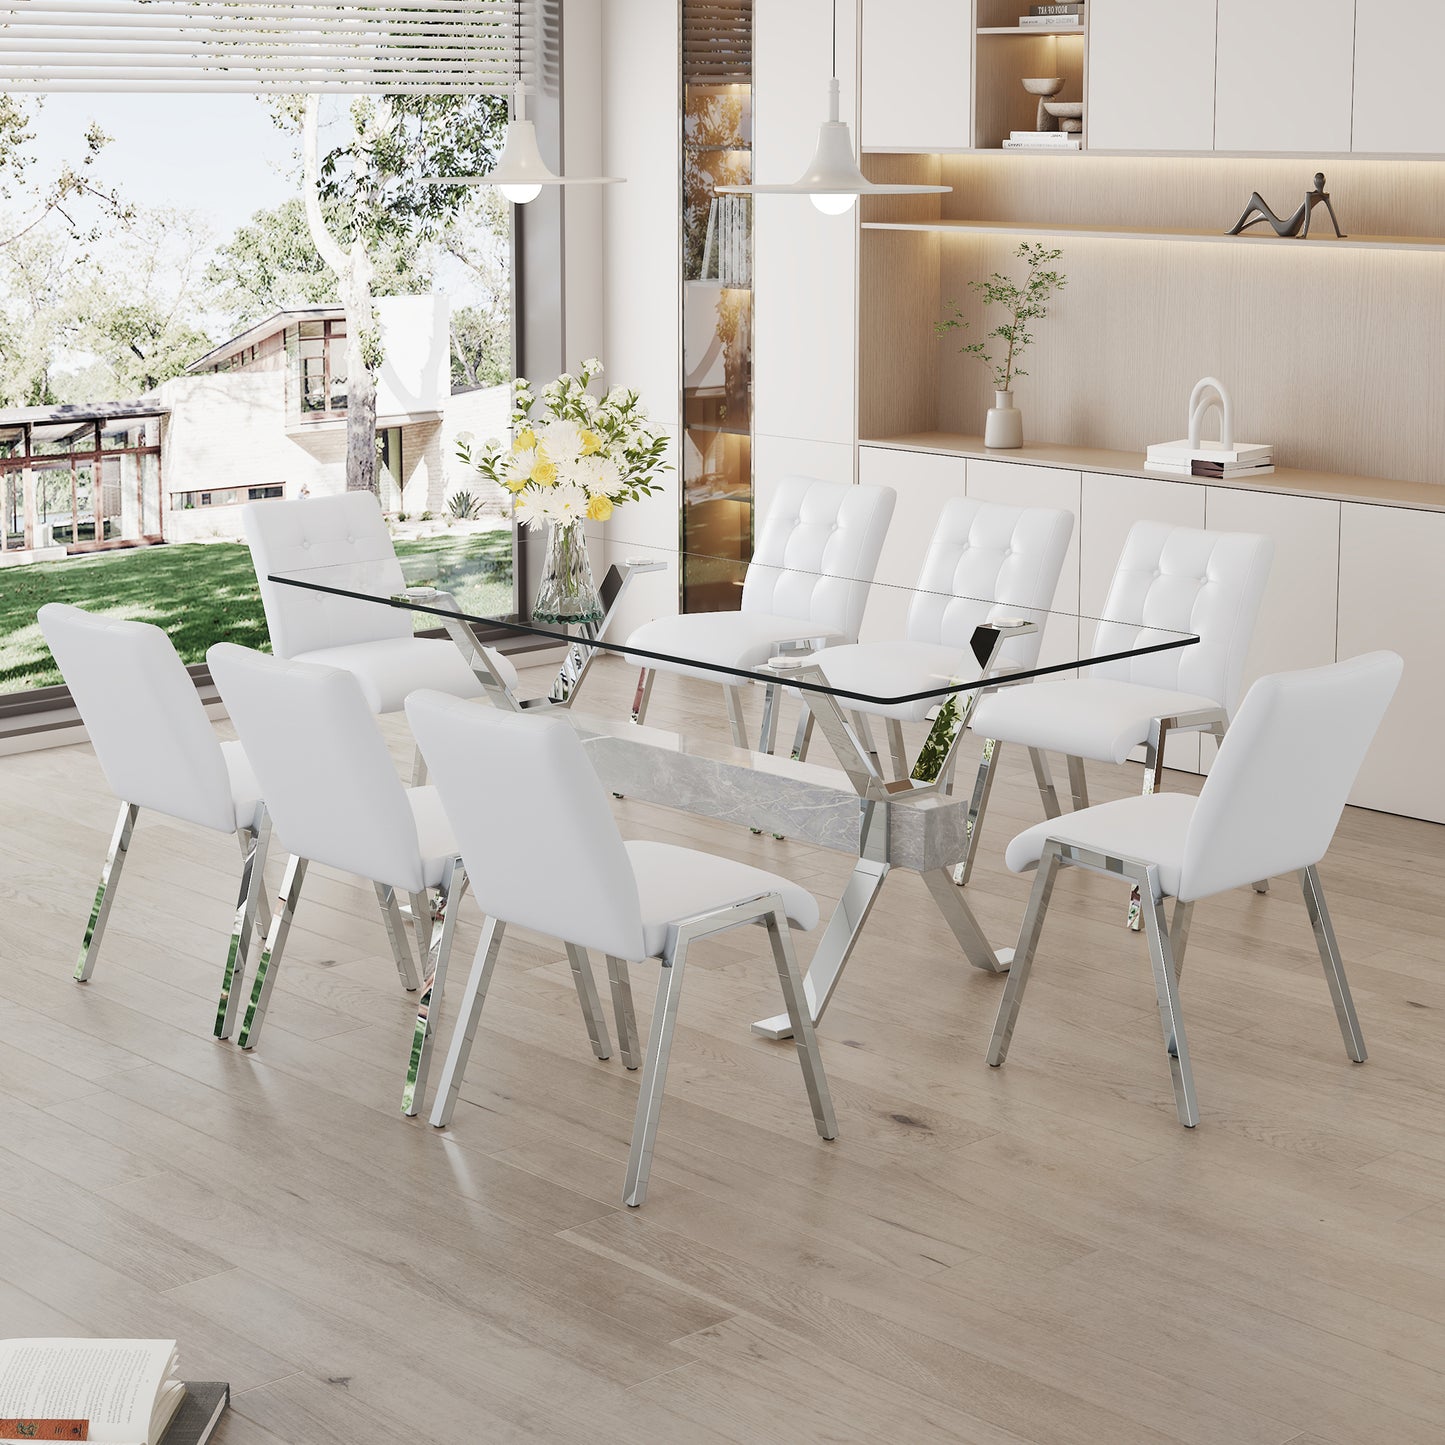 Nicolette 8-Piece Dining Table (white chairs)